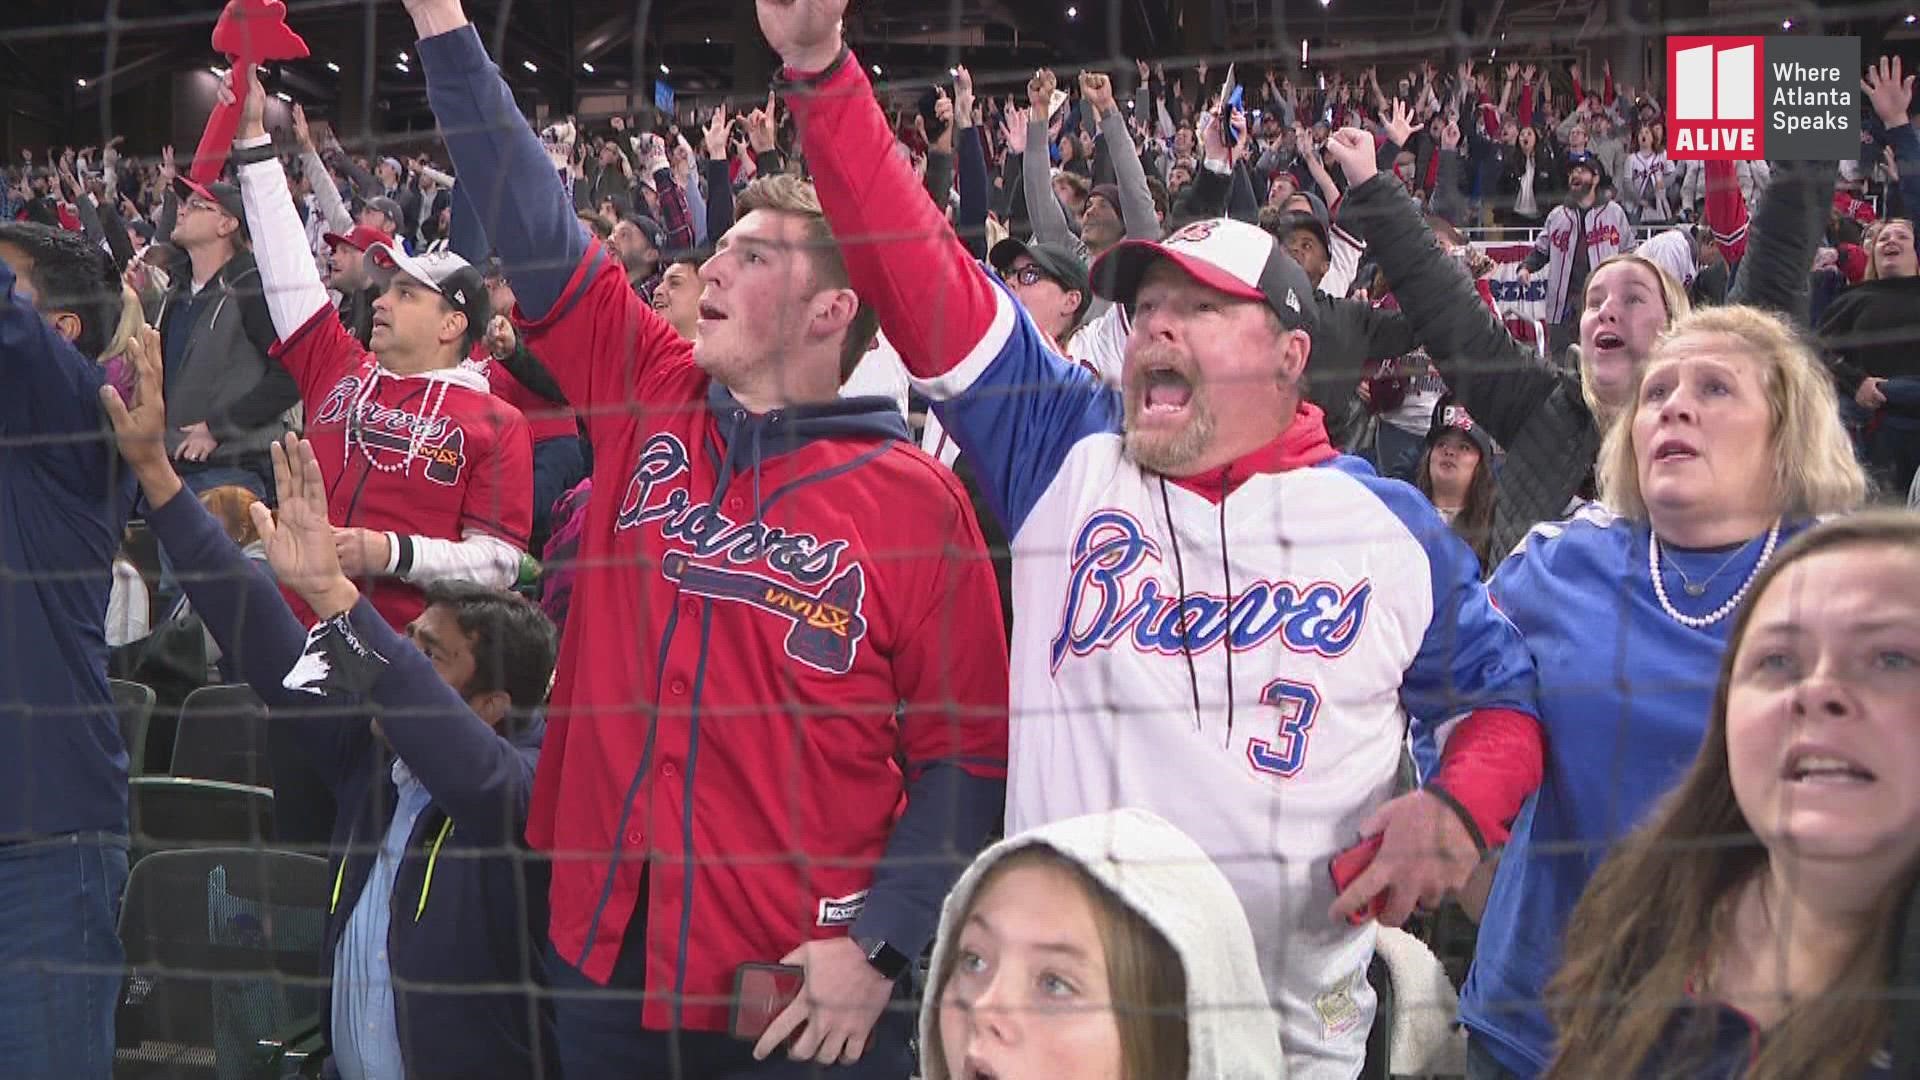 The Atlanta Braves are holding a watch party inside Truist Park for Game 6 of the World Series on Tuesday night. This was the reaction for the first home run.